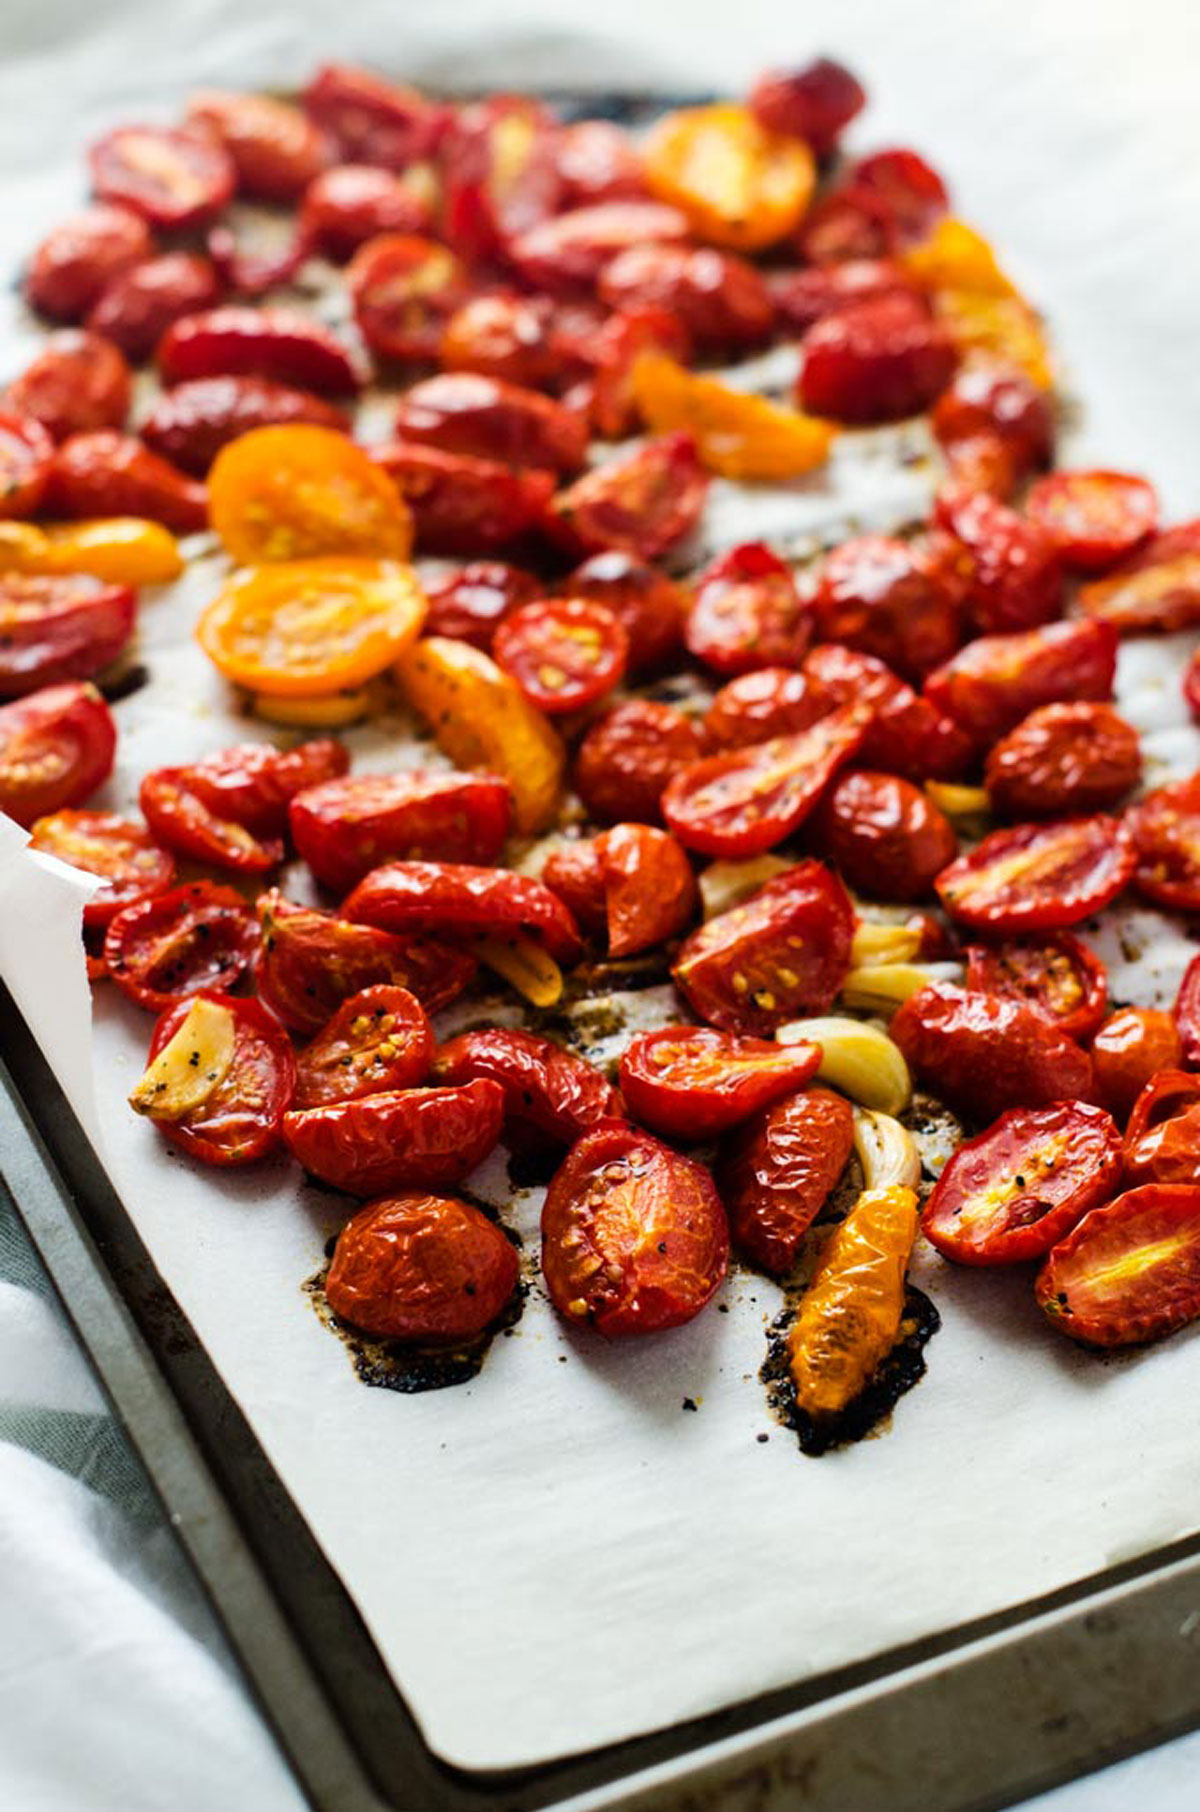 Grape tomatoes roasting on a parchment lined baking sheet.